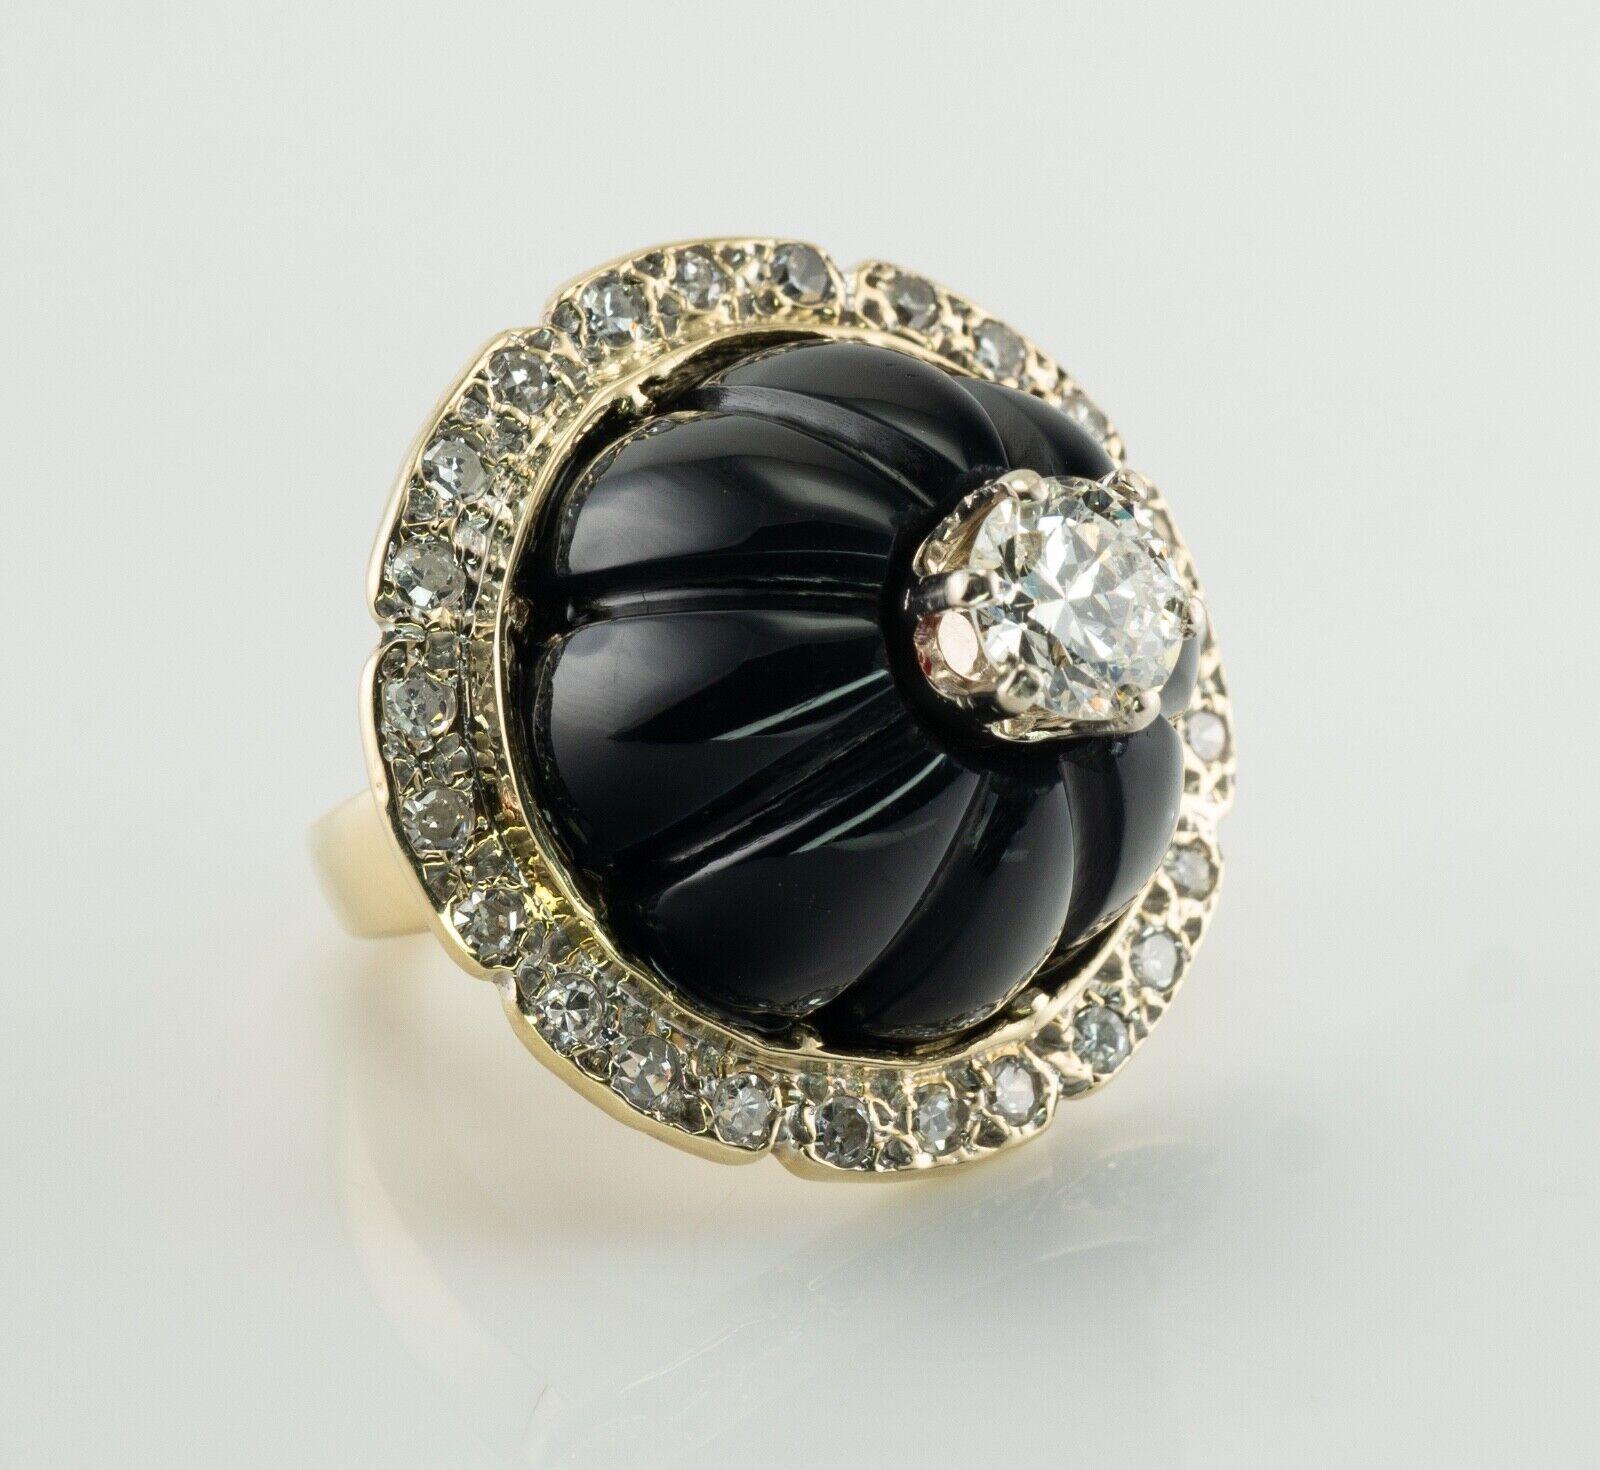 Diamond Black Onyx Fluted Ring 14K Gold 2.08 TDW

This incredible one of a kind ring is finely crafted in solid 14K Yellow Gold. The center round brilliant cut diamond is 1.24 carat of SI2 clarity and I color. It is surrounded by 24 single cut